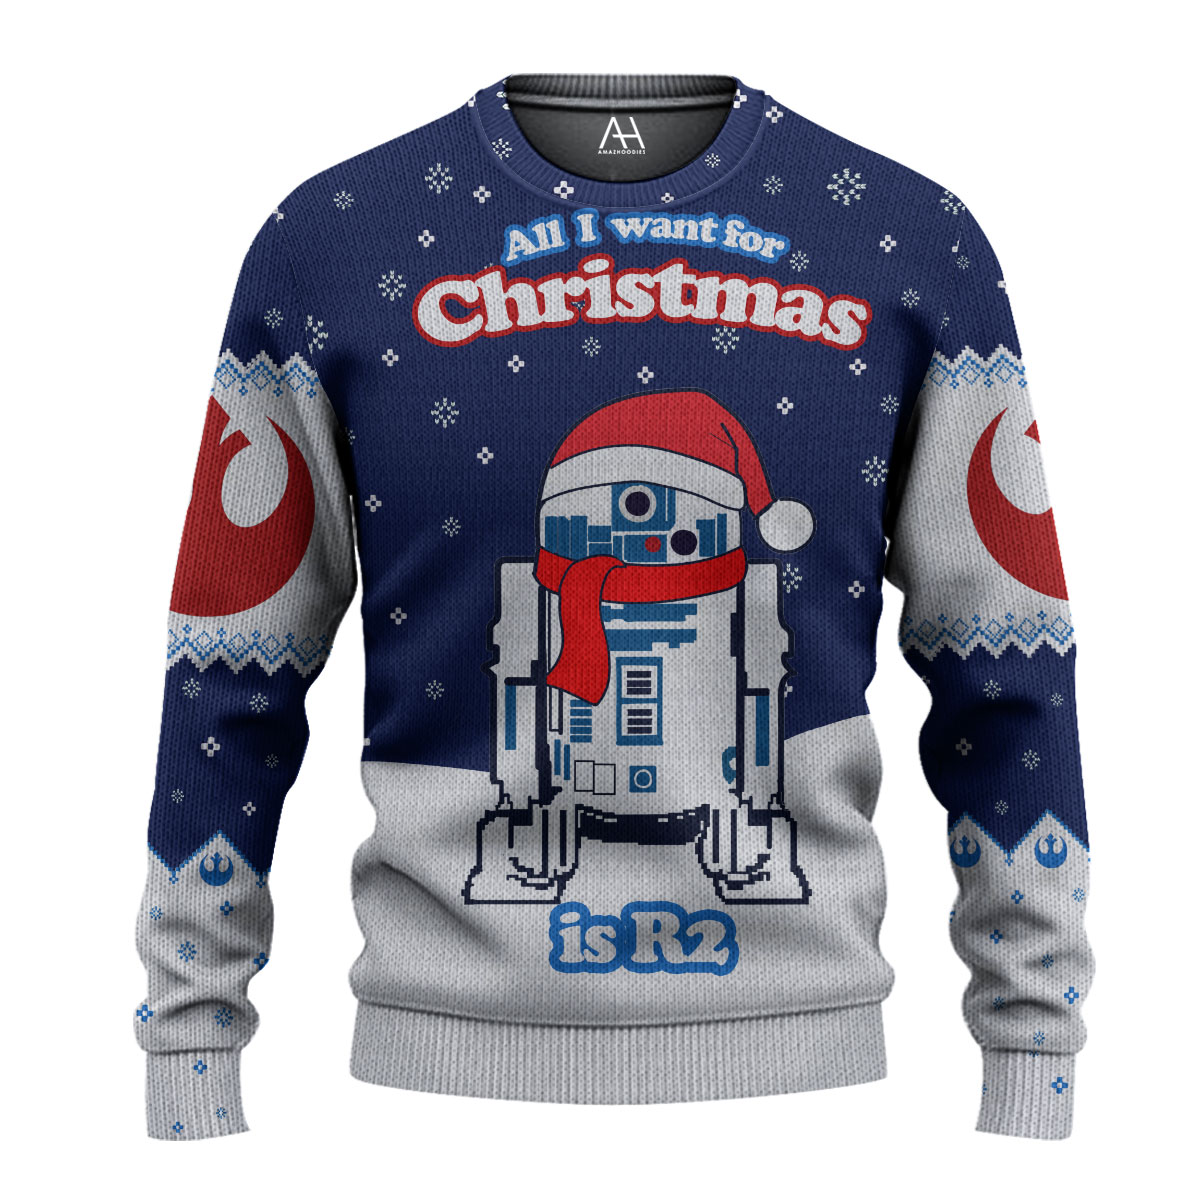 R2 D2 All i want for christmas is R2 3d shirt hoodie 1